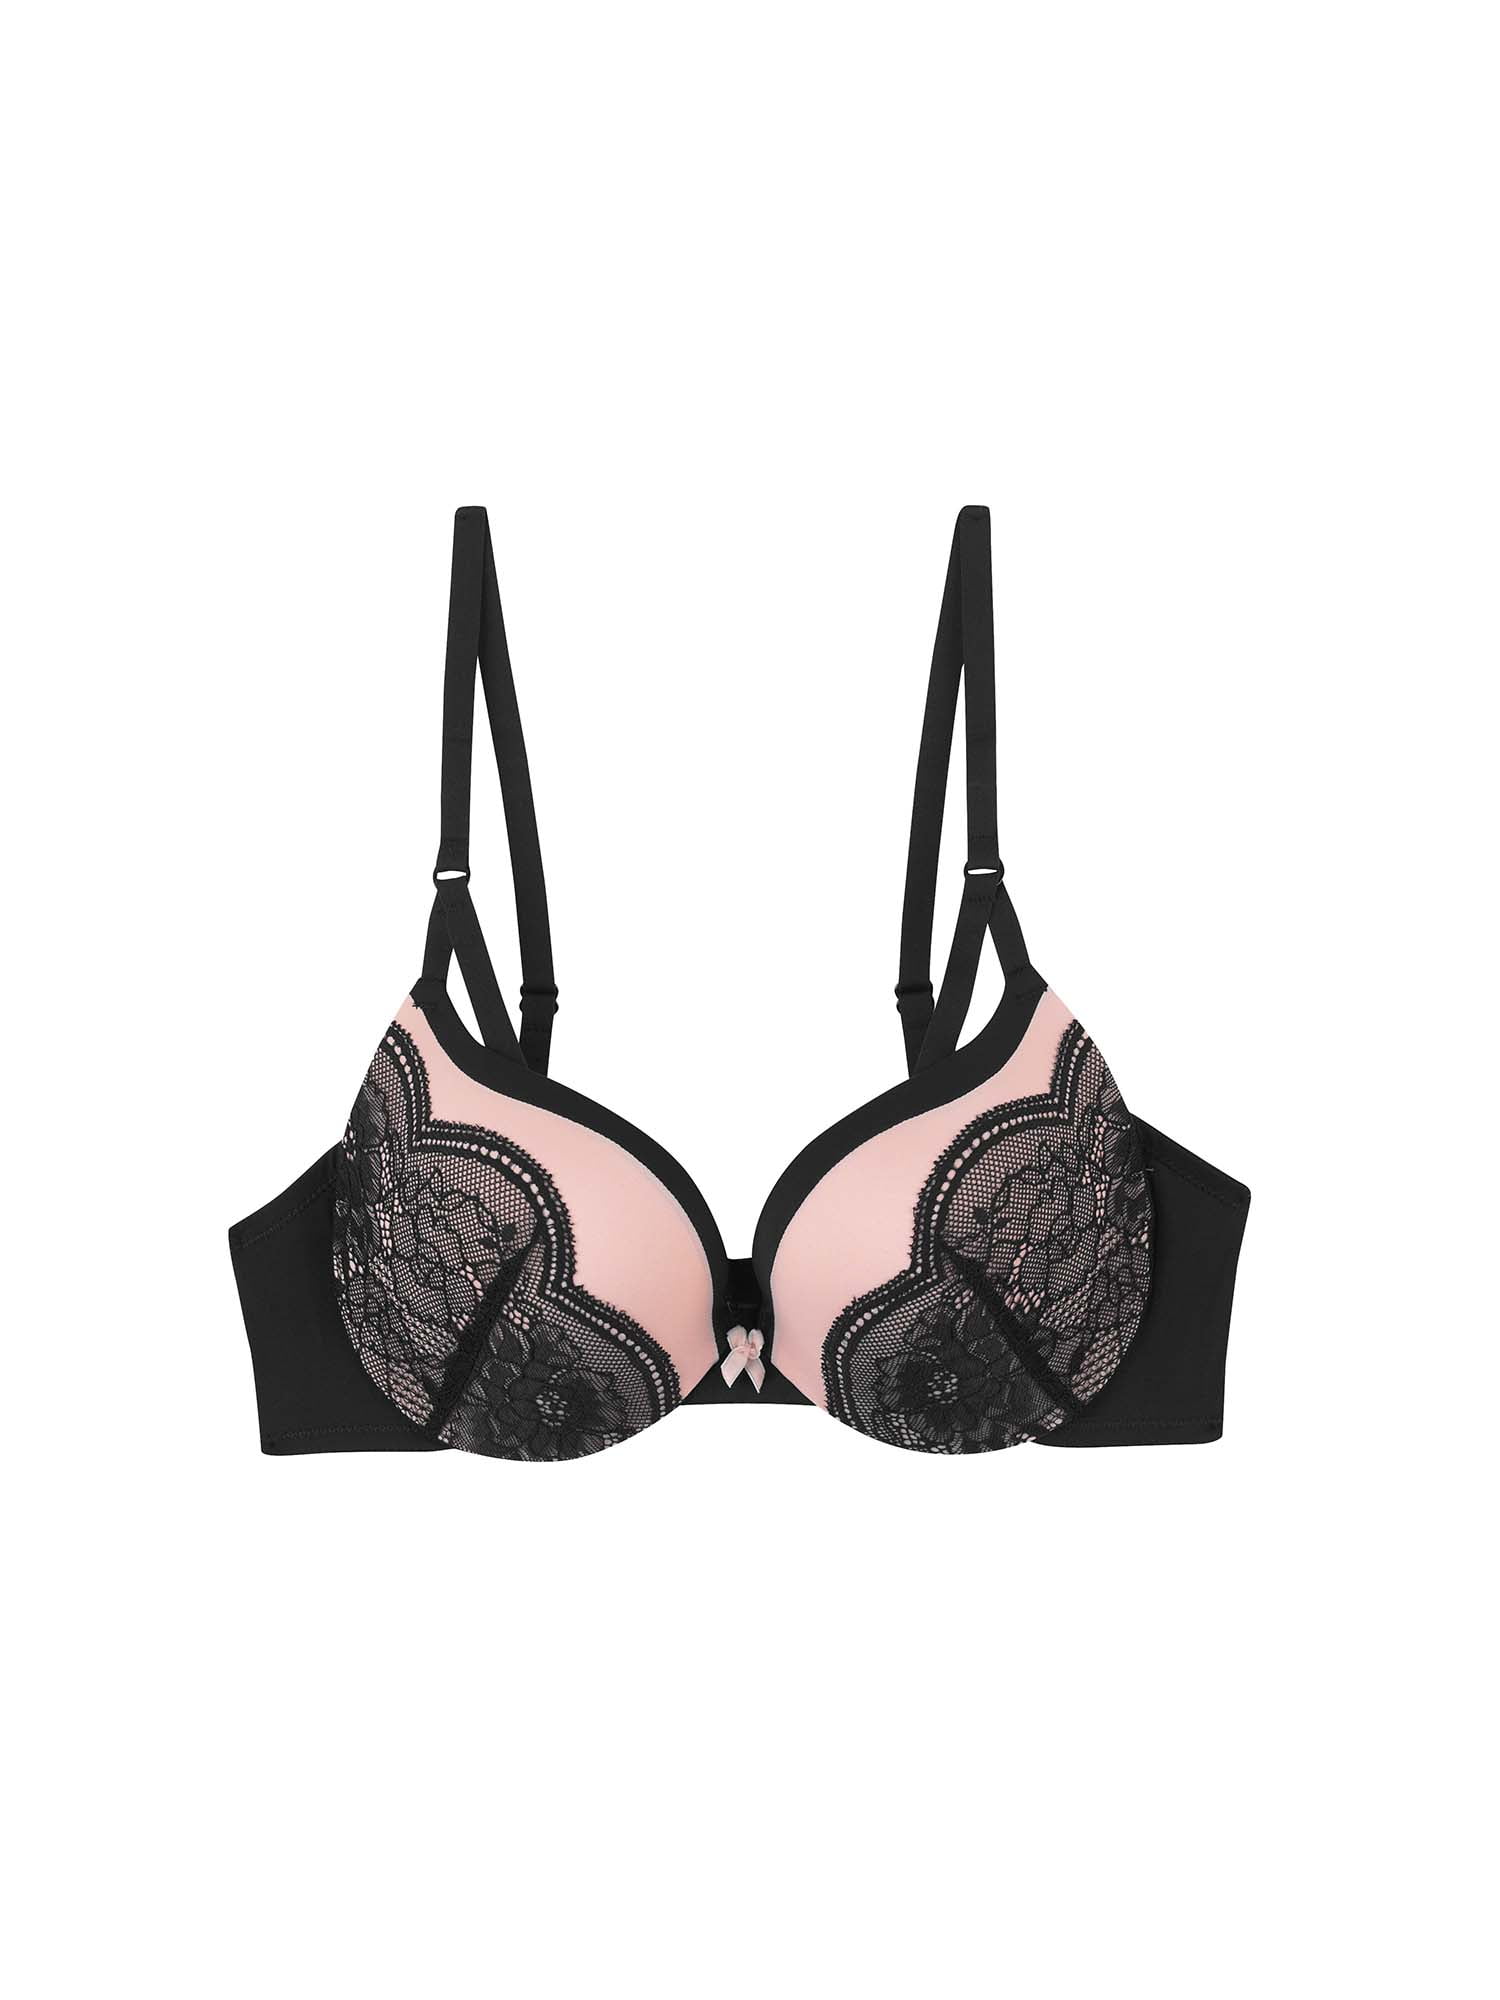 The Bra Box - Push-up and shape your girls with this Maidenform Bra Box Set  💜Maidenform Lace Push Up Bra X2 Size: 38D Price: $395.00 TTD and includes  all two bras and